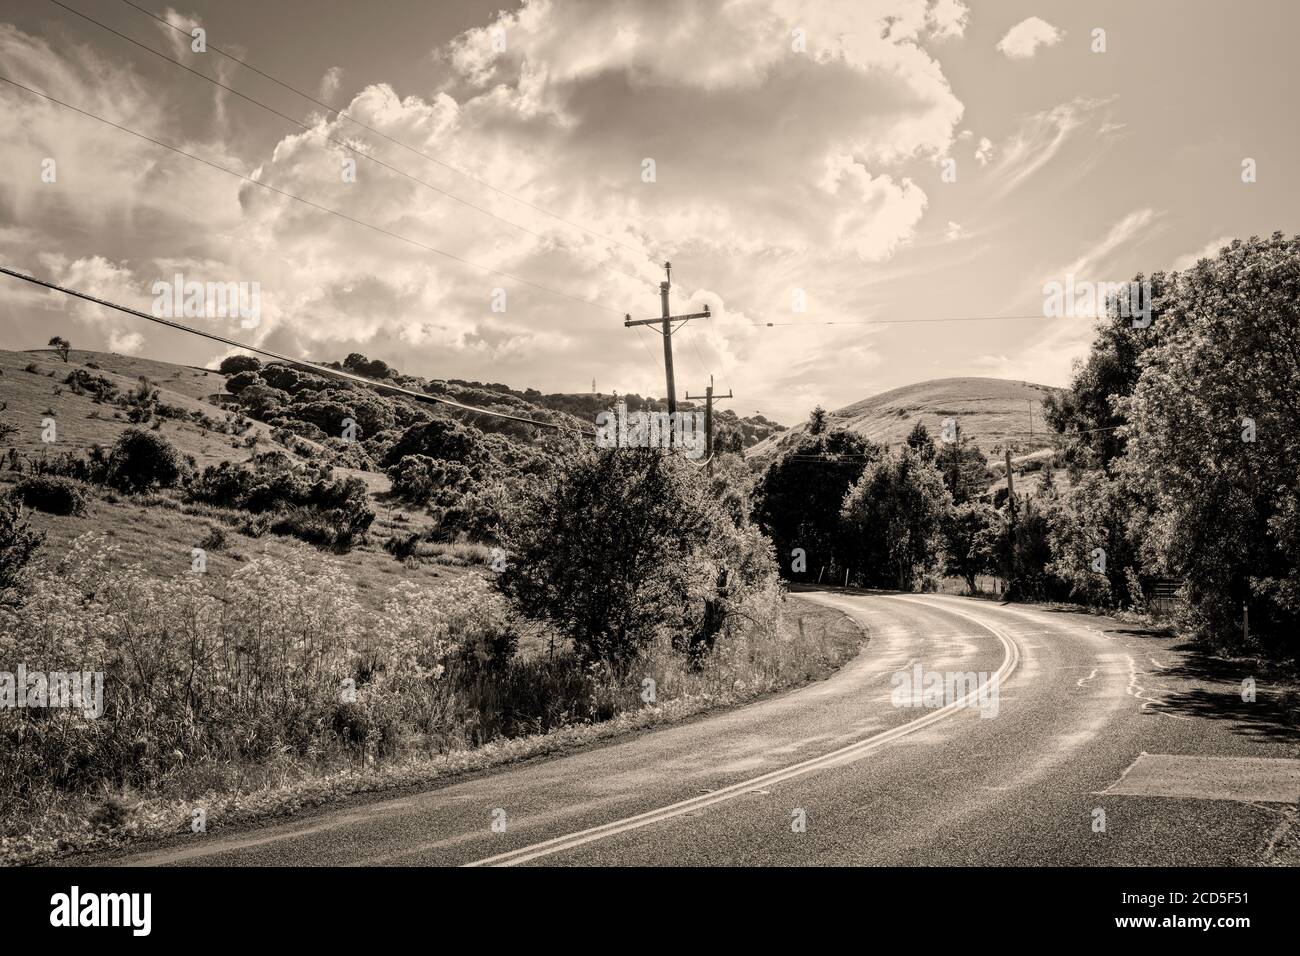 Black and white landscape with country road and hills, California, USA Stock Photo